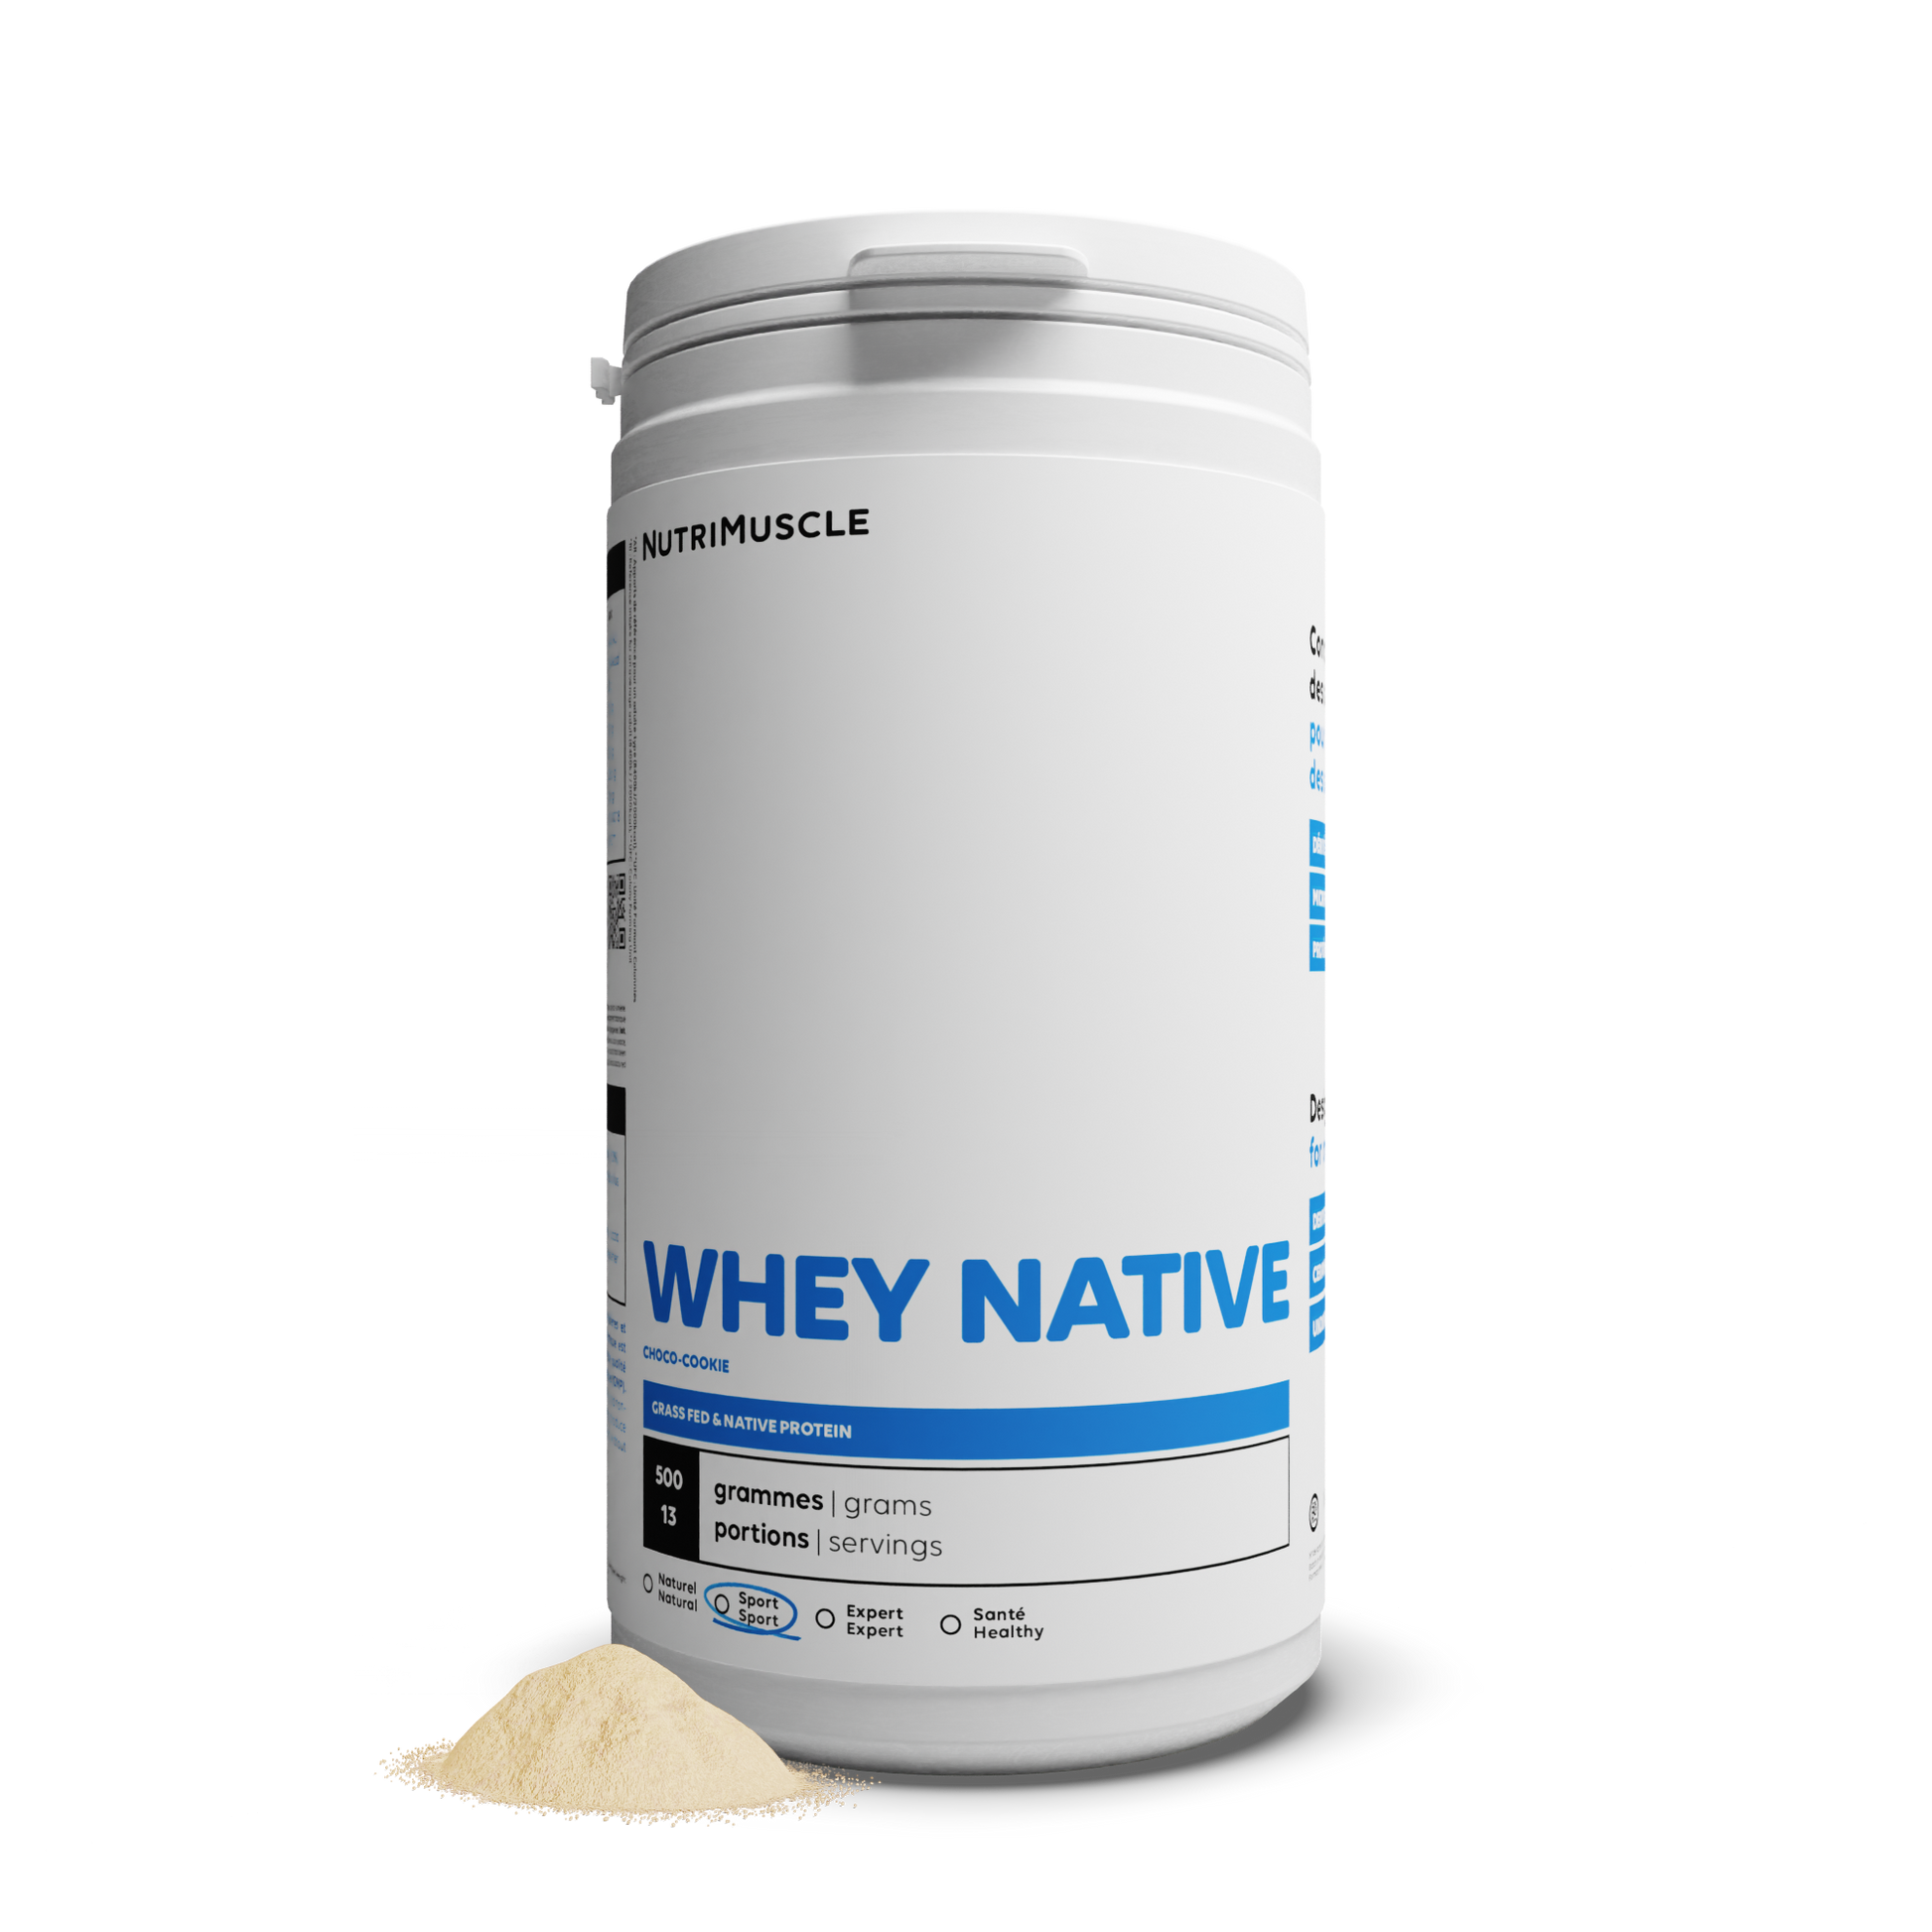 Whey Native – Nutrimuscle